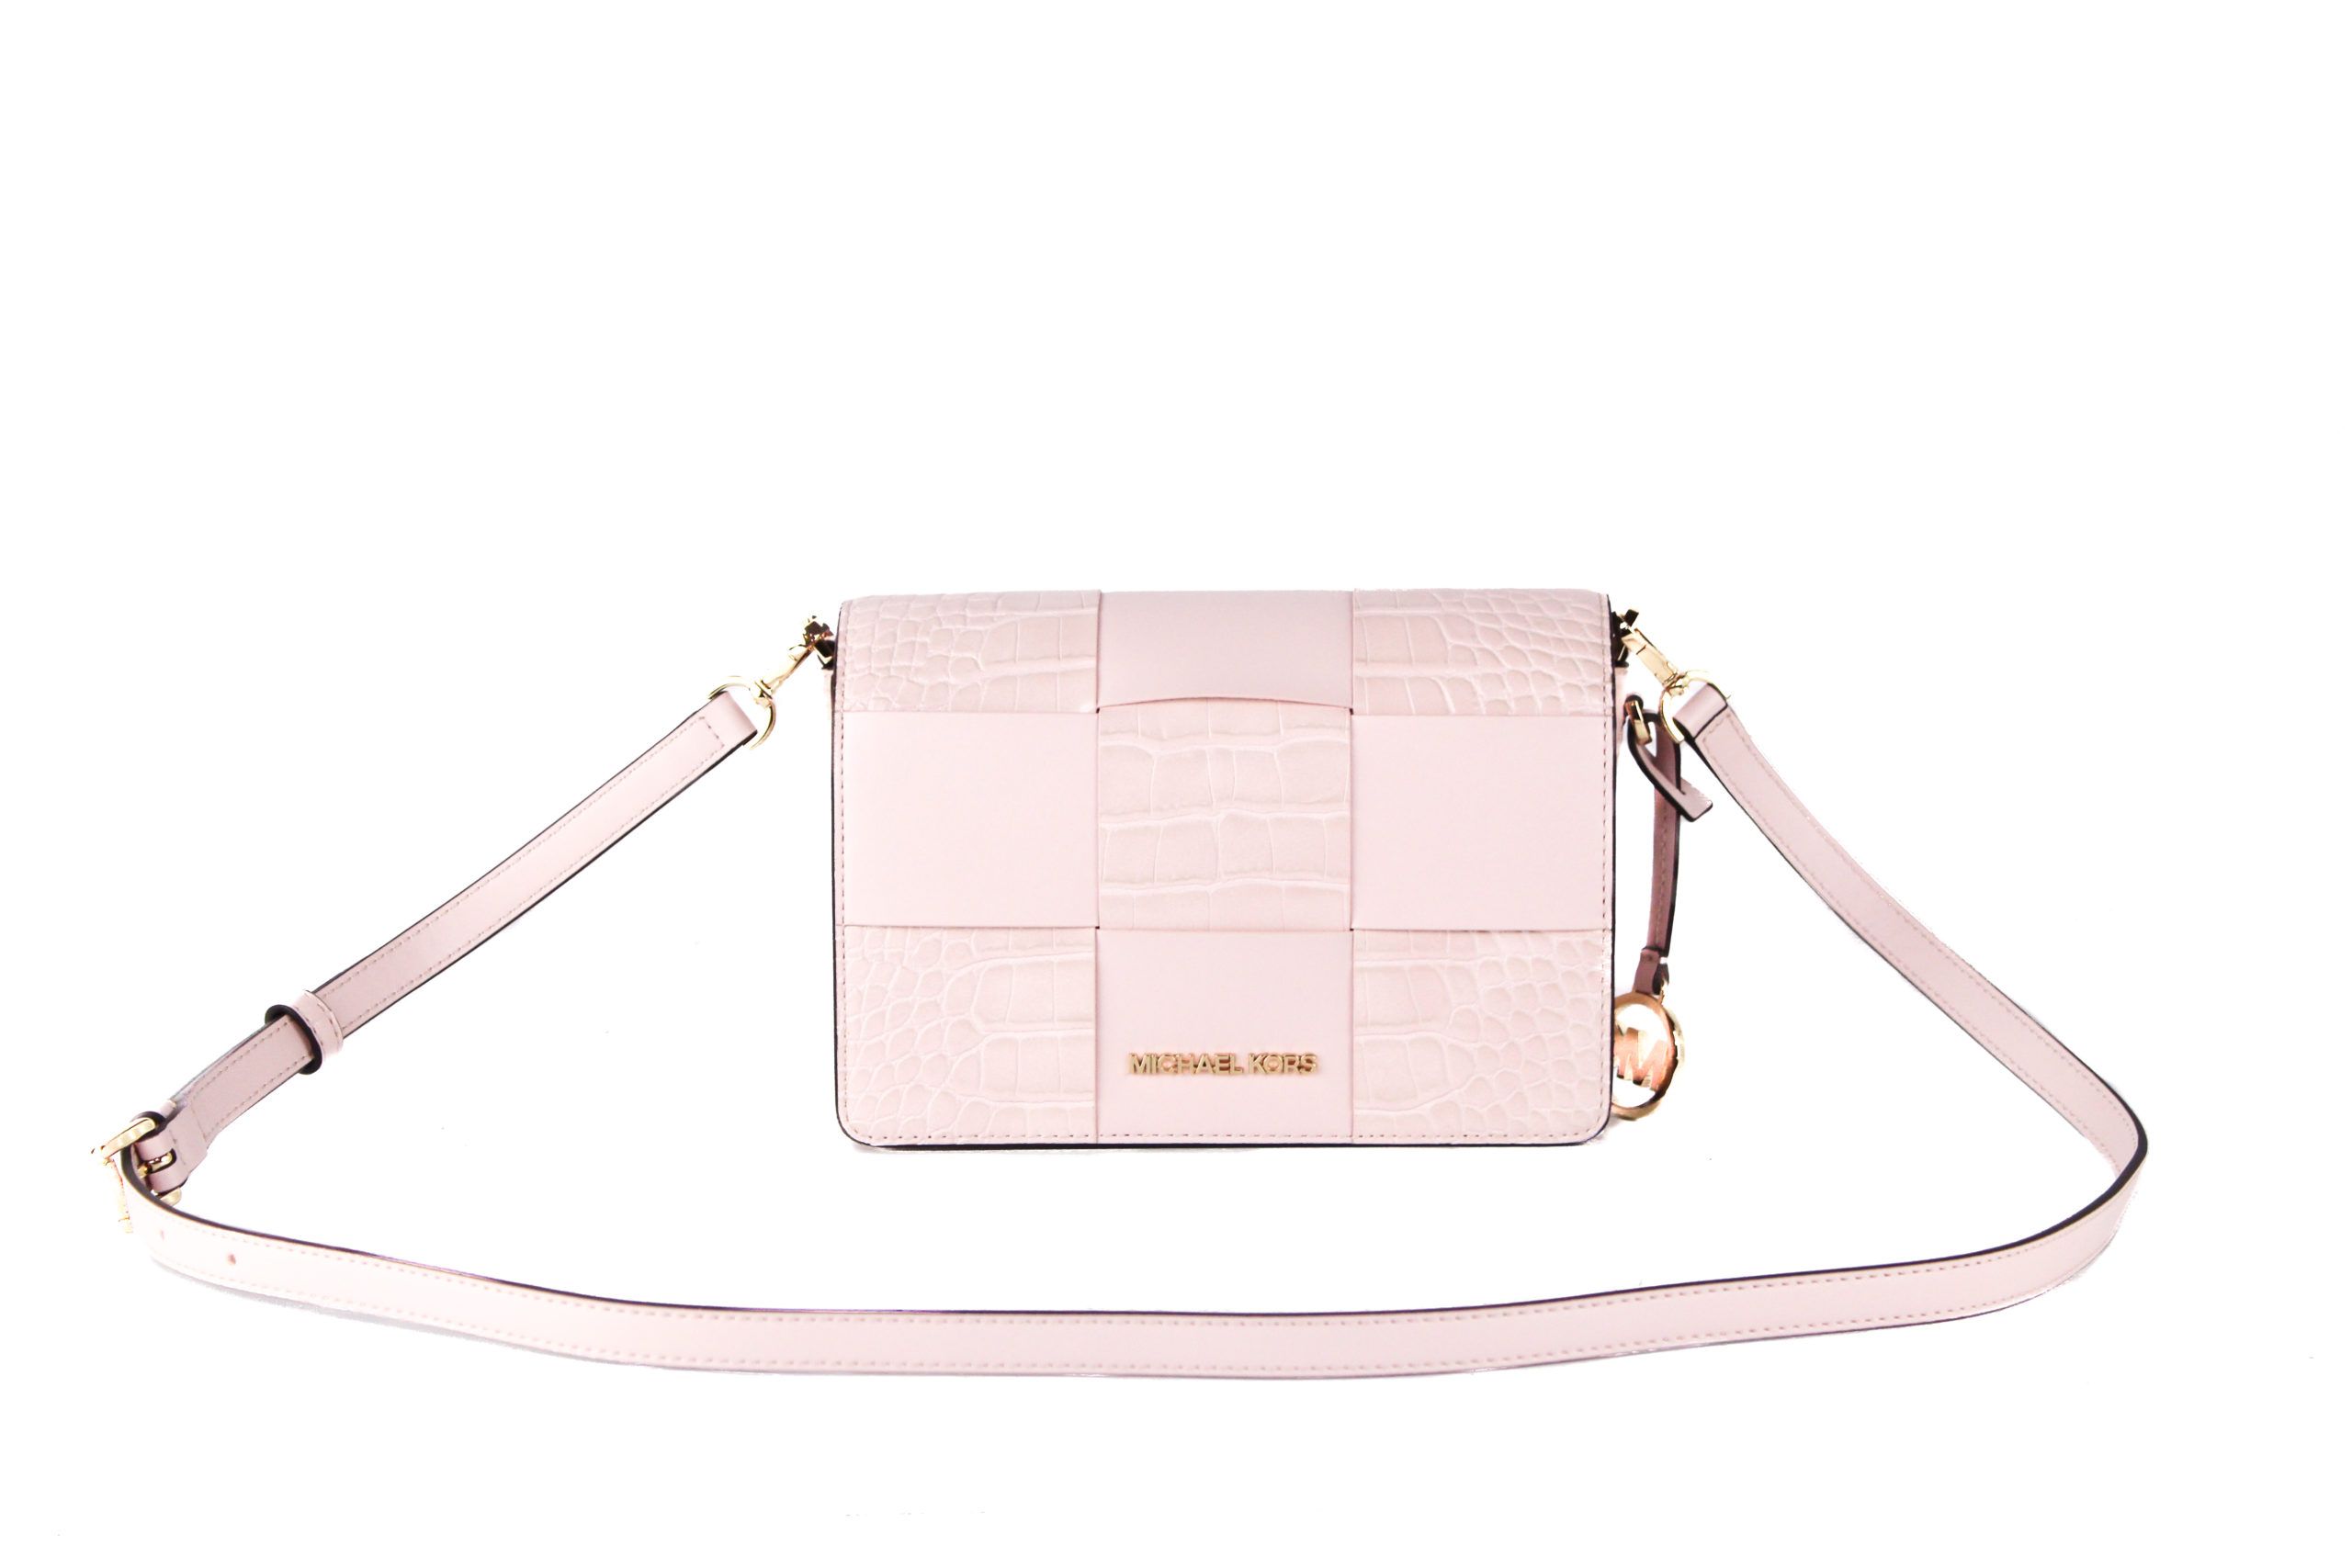 Brand New with Tags Attached (100% Authentic). 
Style:. Michael Kors Mercer Small Flap Clutch Crossbody (Powder Blush)
Material:. Crocodile Print & Patent Leather
Features: Convertible (Crossbody or Clutch), Adjustable/Detachable Crossbody Strap, Inner Slip and Zip Pockets, Magnetic Snap Flap Closure. 
Measures: 21.59 cm. W x 14.60 cm H x 8.25 cm D